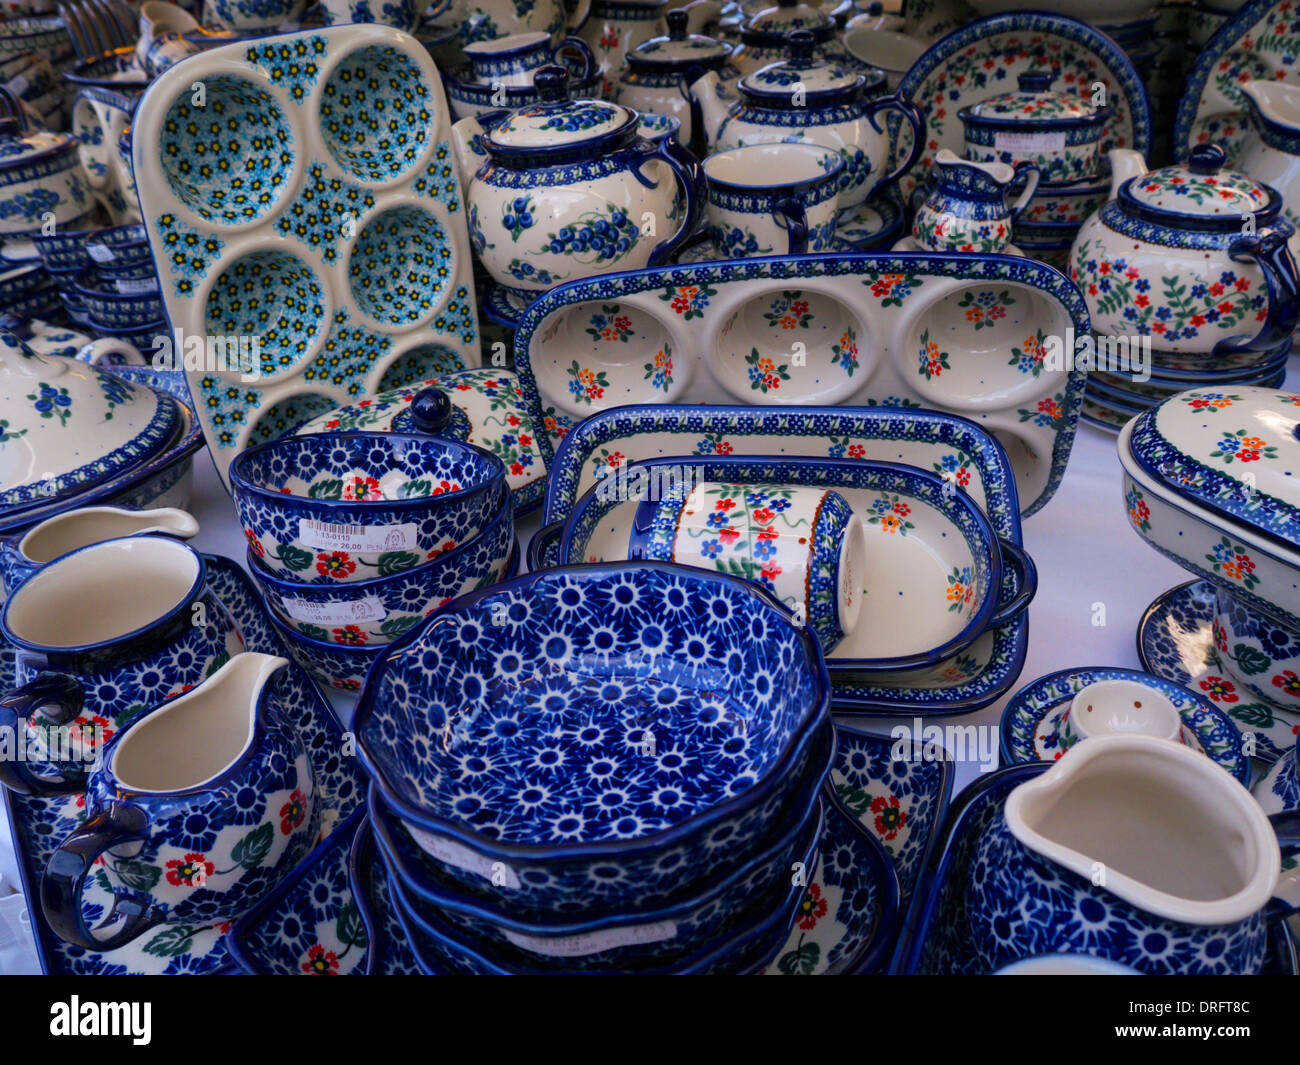 A variety of Polish pottery lines the shelves at the Christmas markets in Krakow, Poland Stock Photo